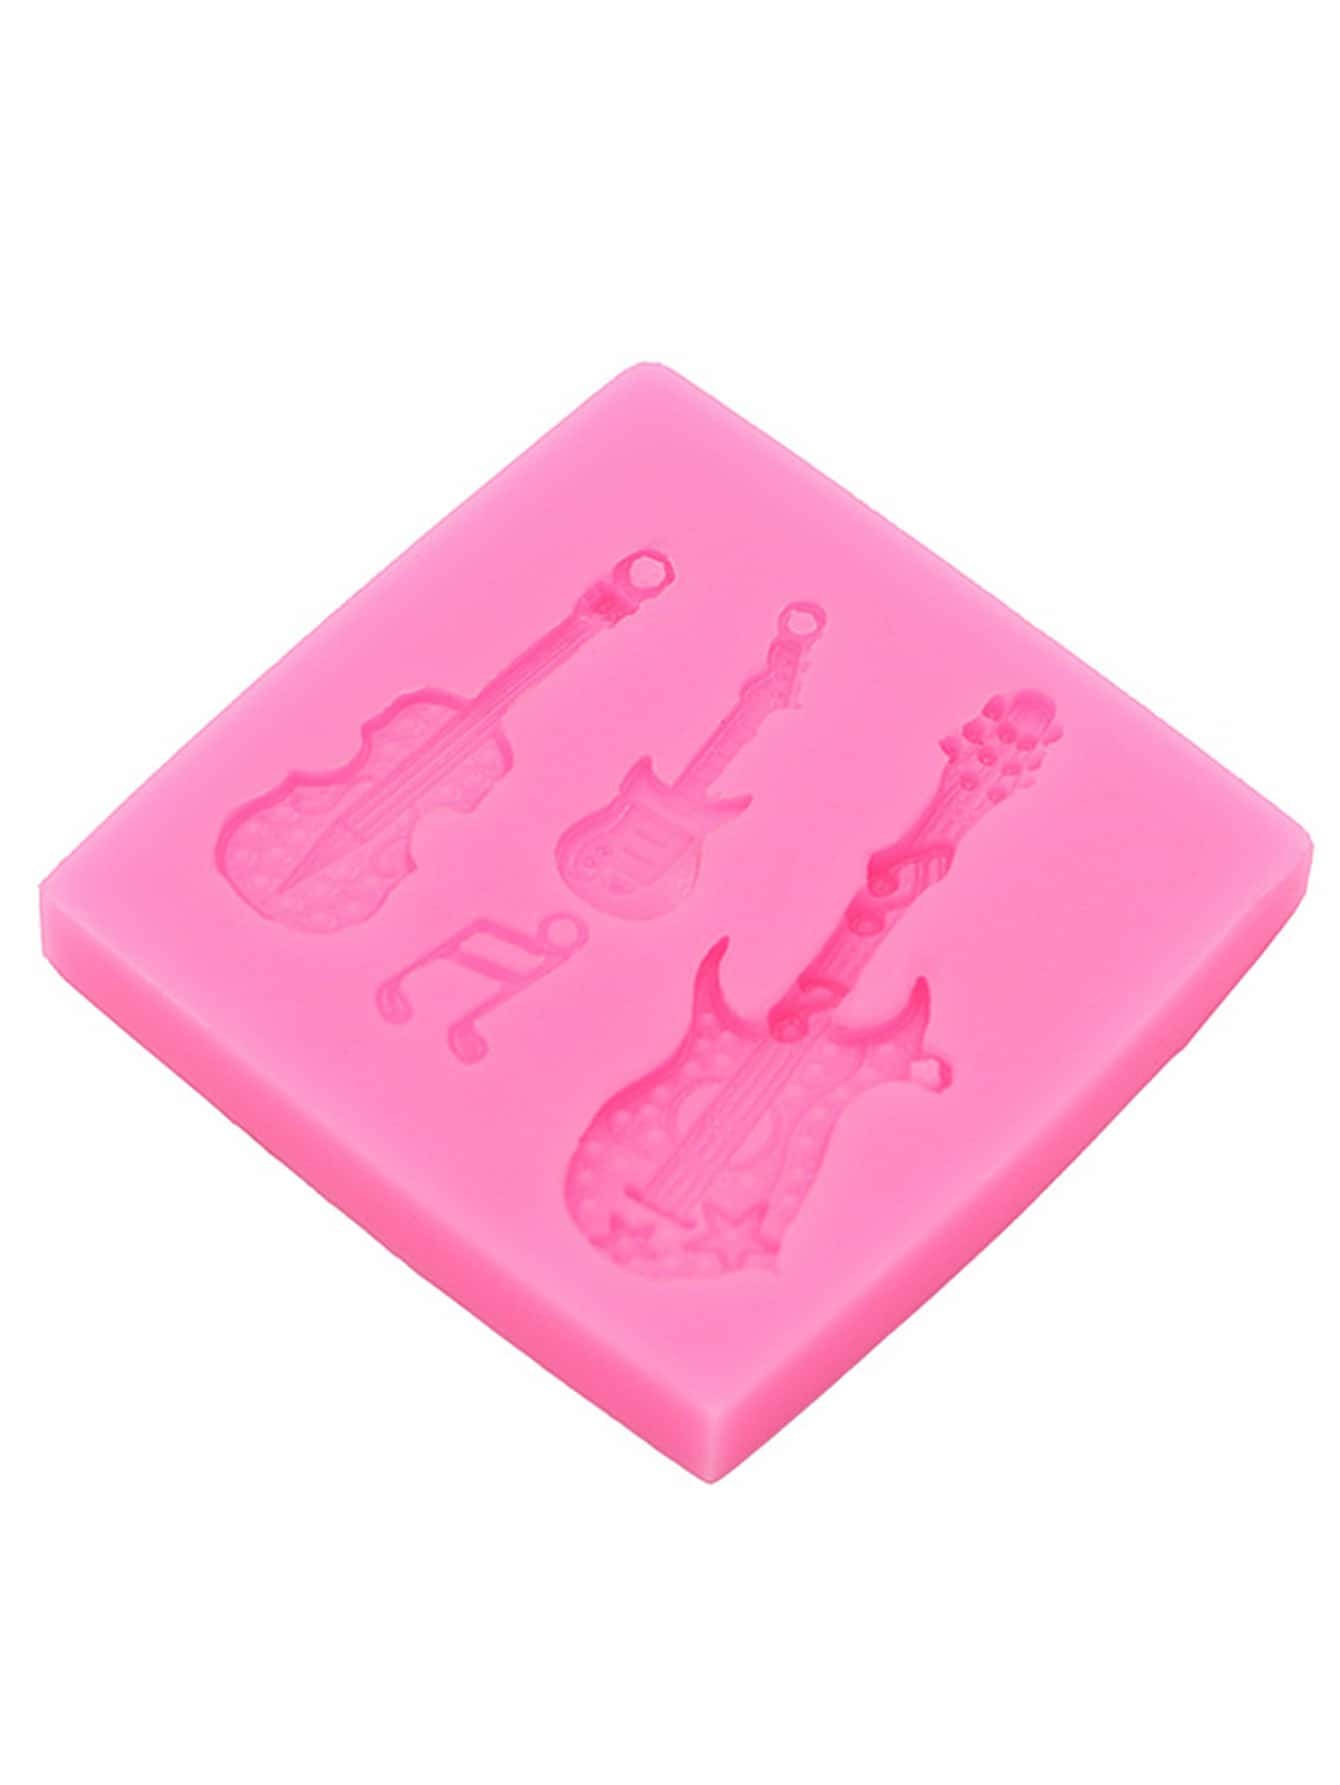 1pc Musical Instrument Shaped DIY Silicone Mold